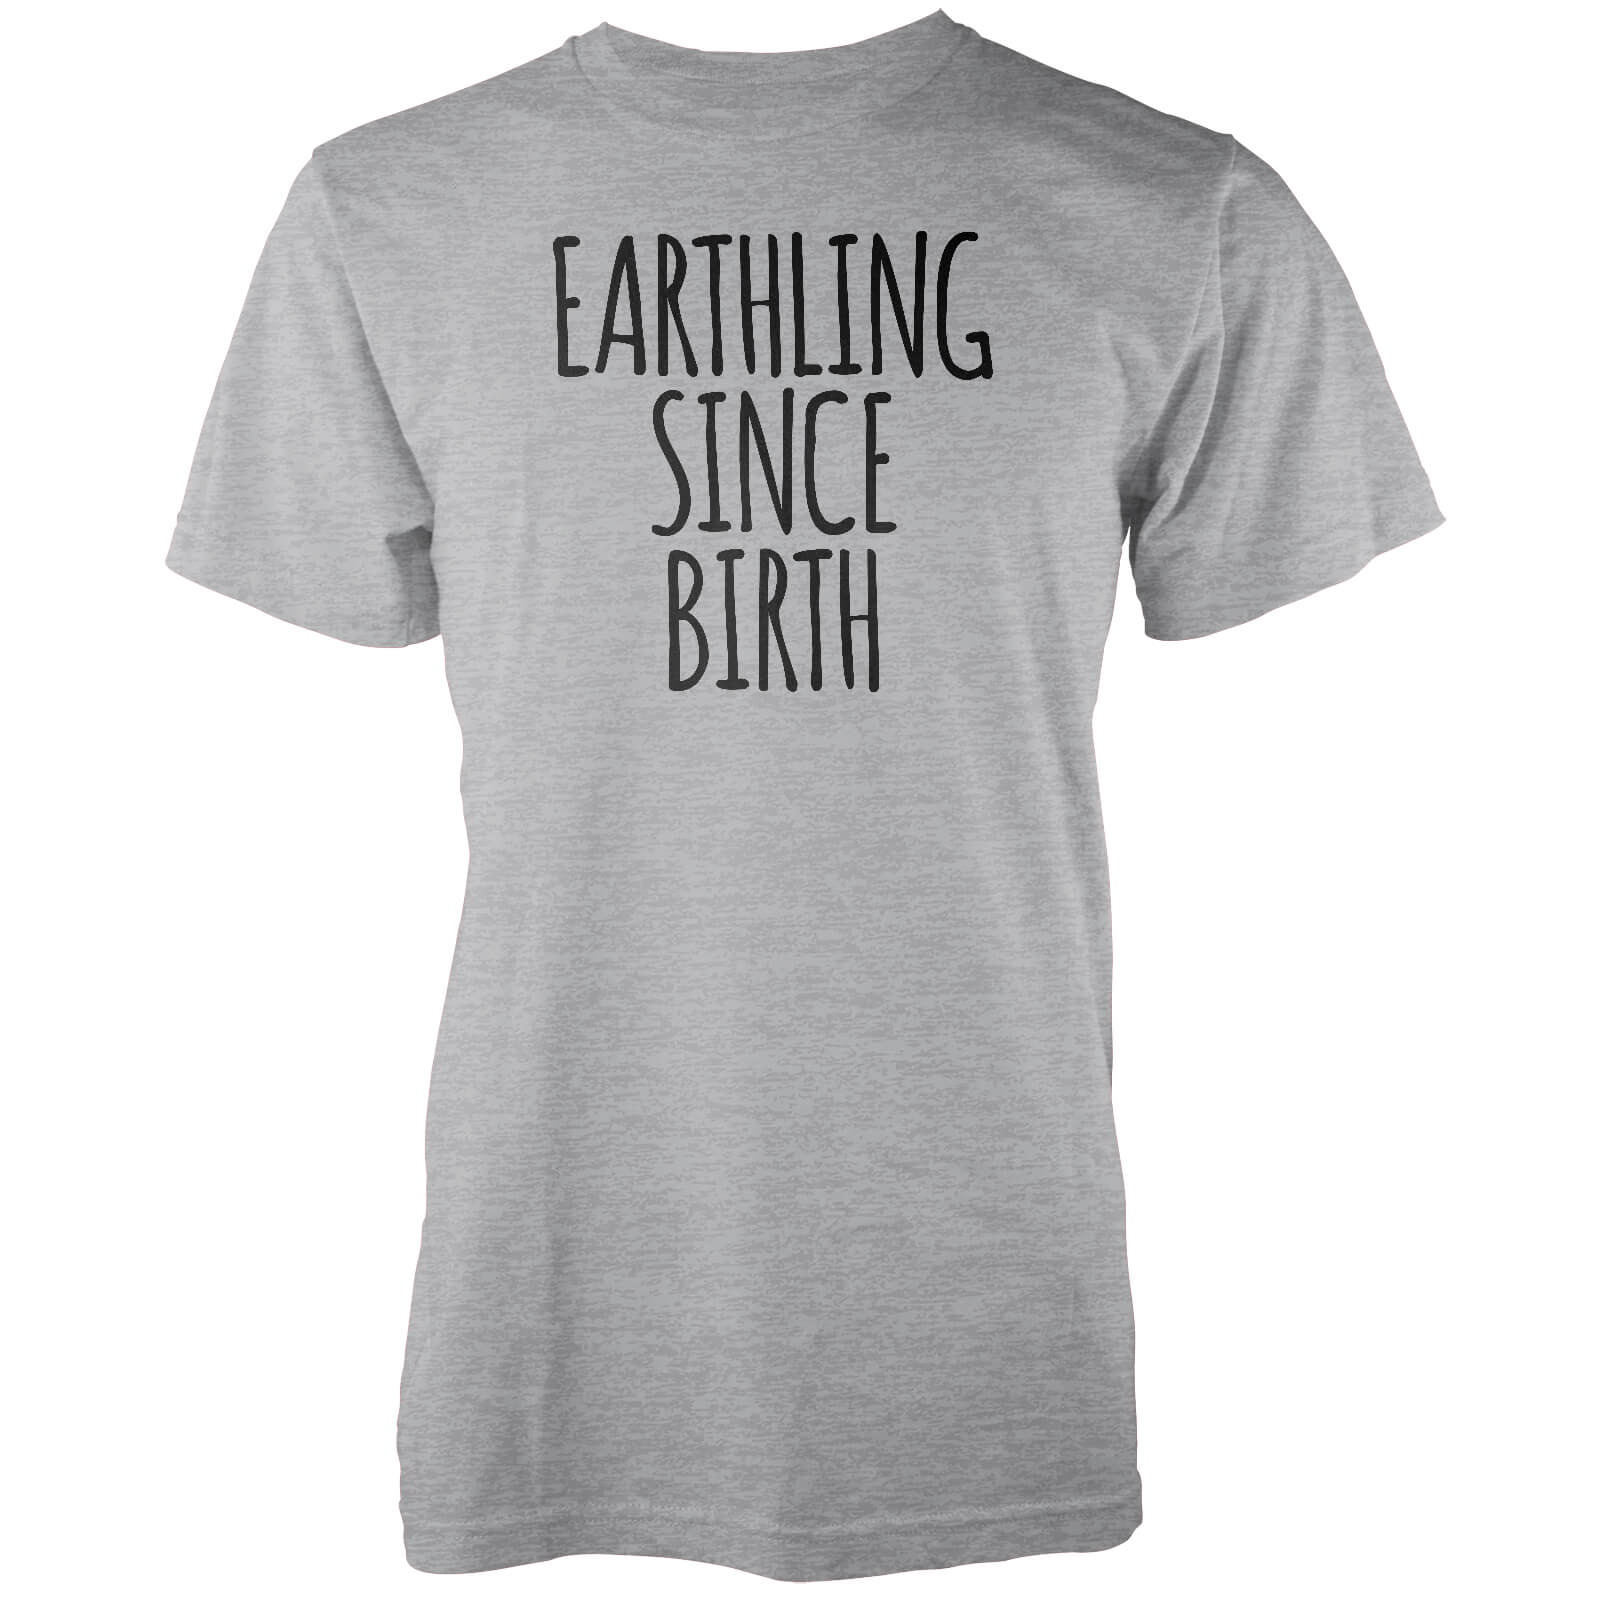 T-Shirt Femme Earthling Since Birth - Gris - S - Gris